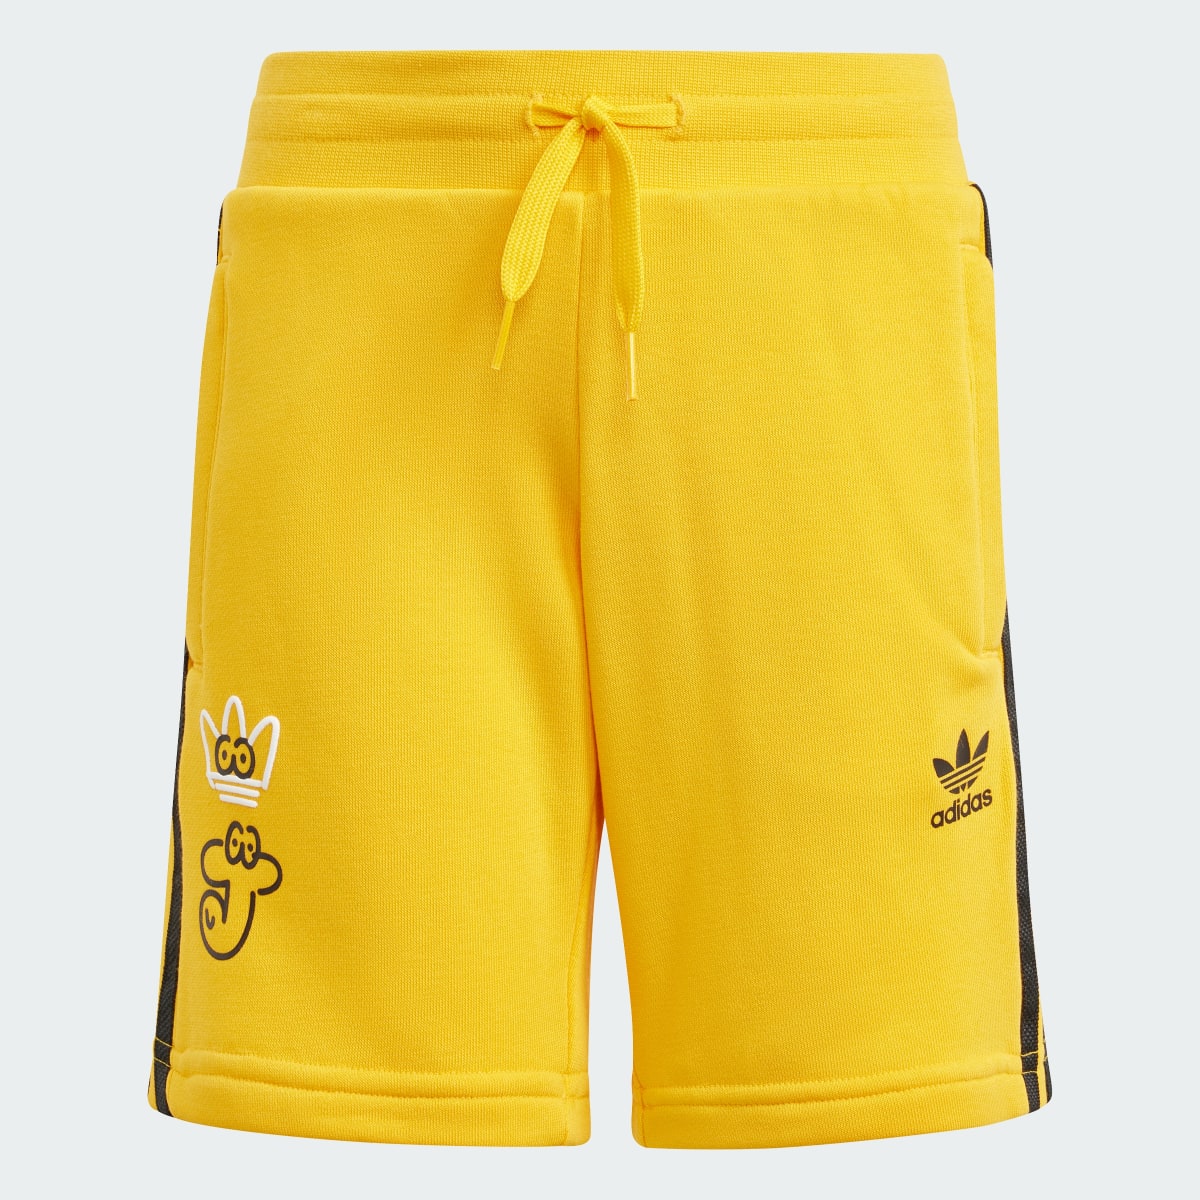 Adidas Completo adidas x James Jarvis Shorts and Tee. 4